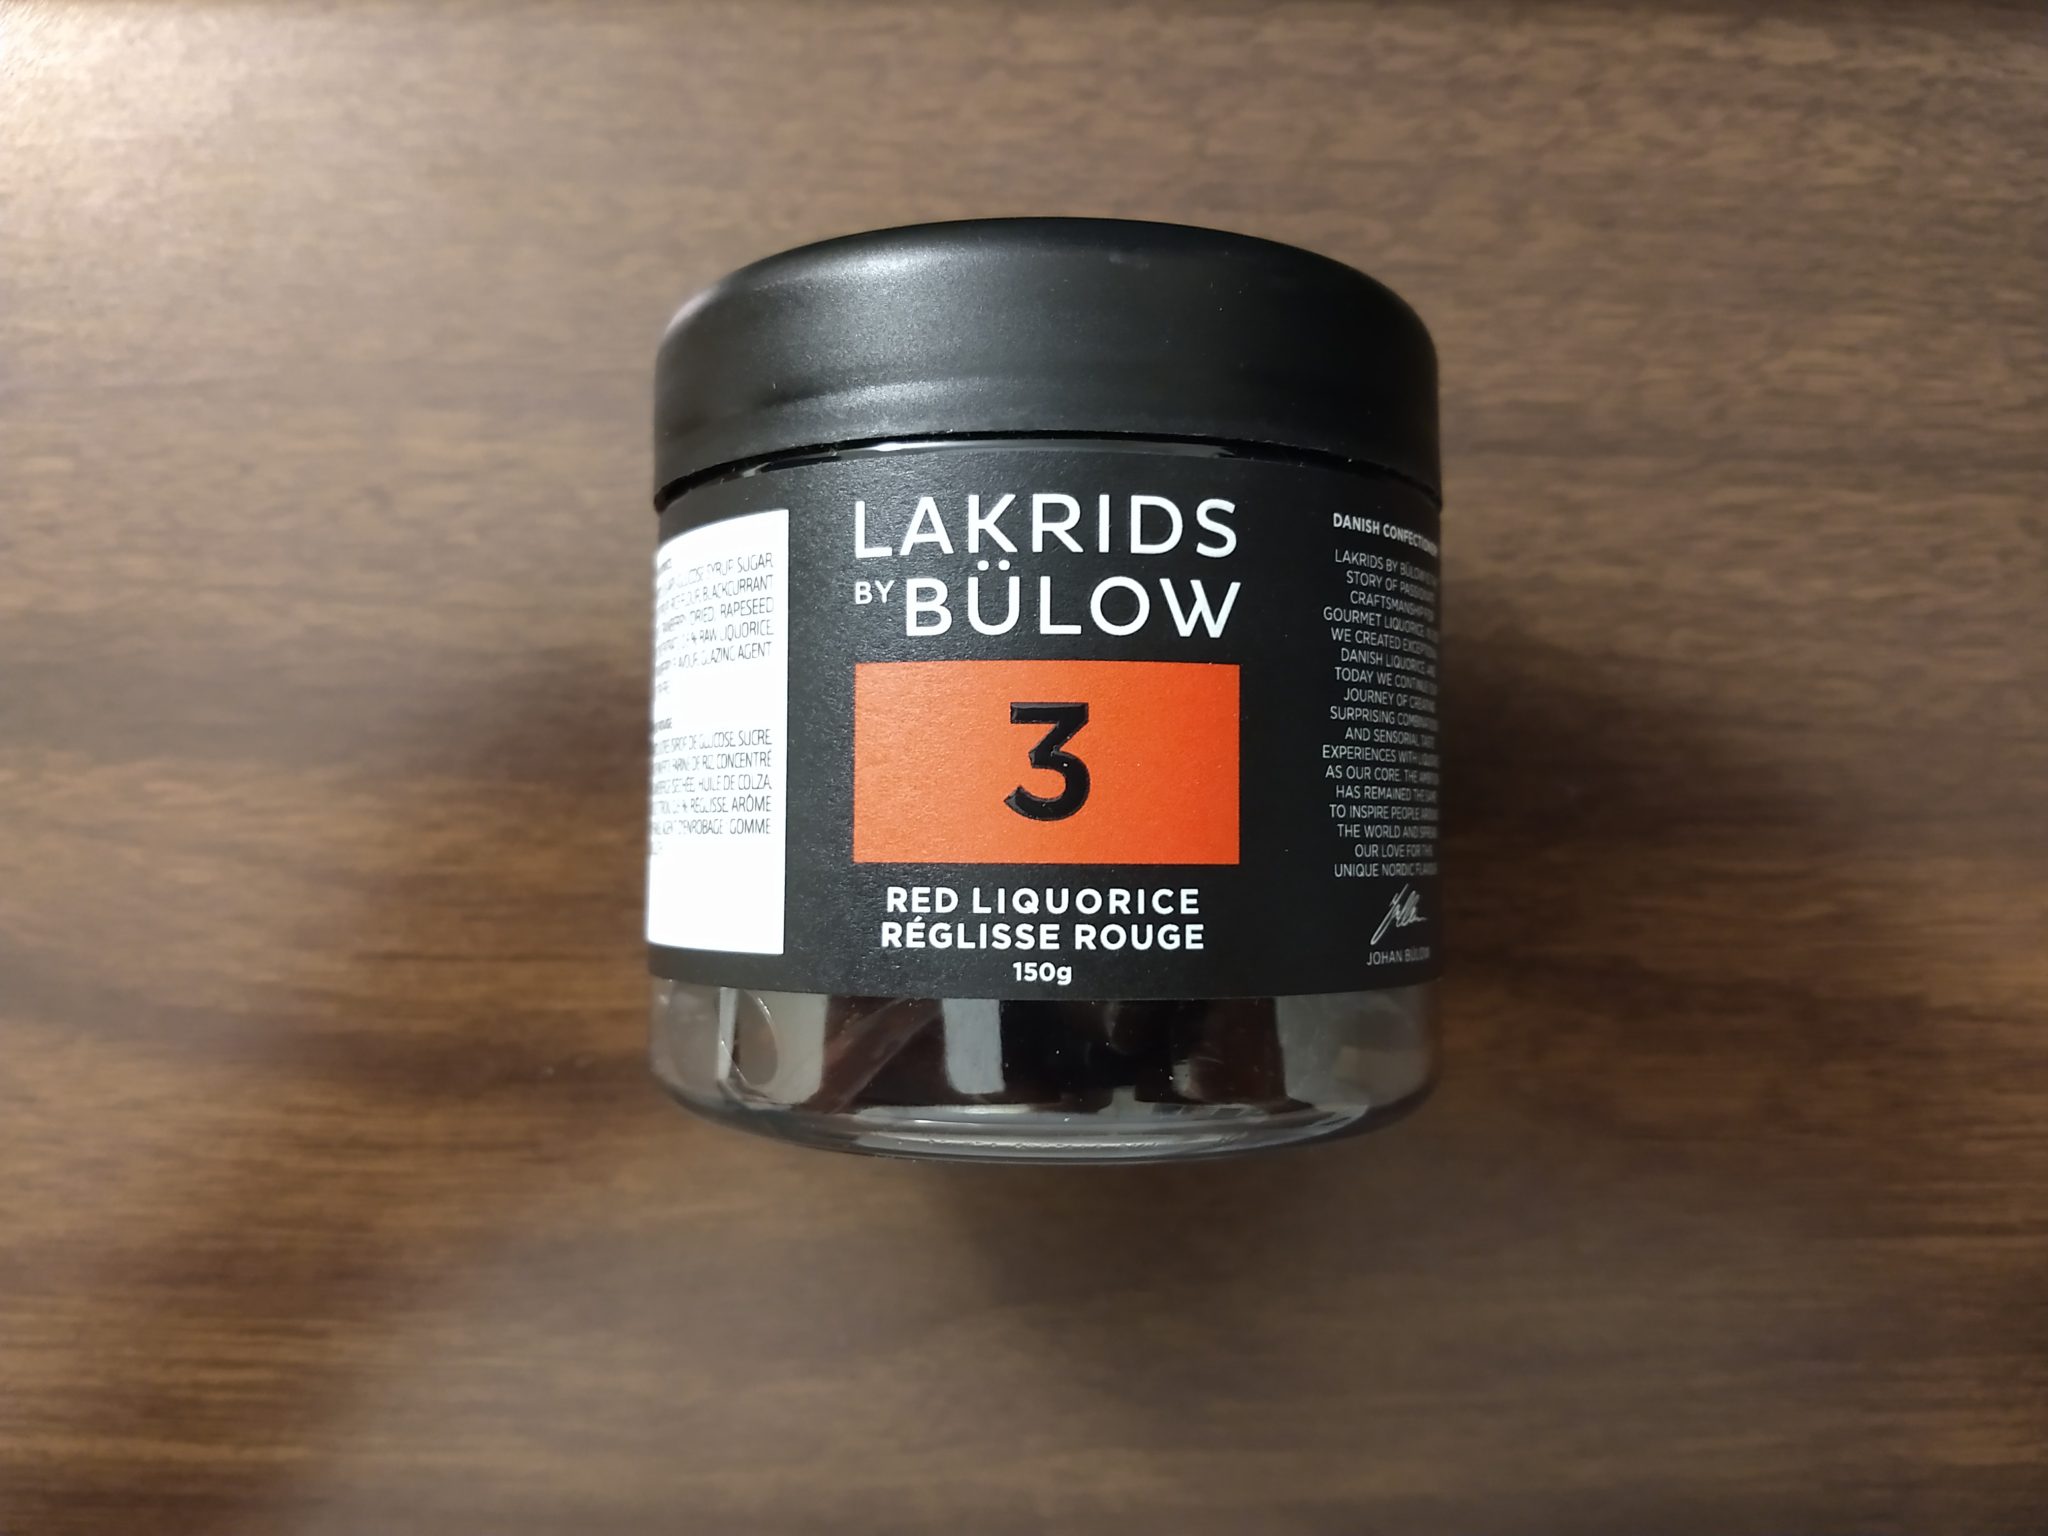 Lakrids by Bülow – No. 3 Red